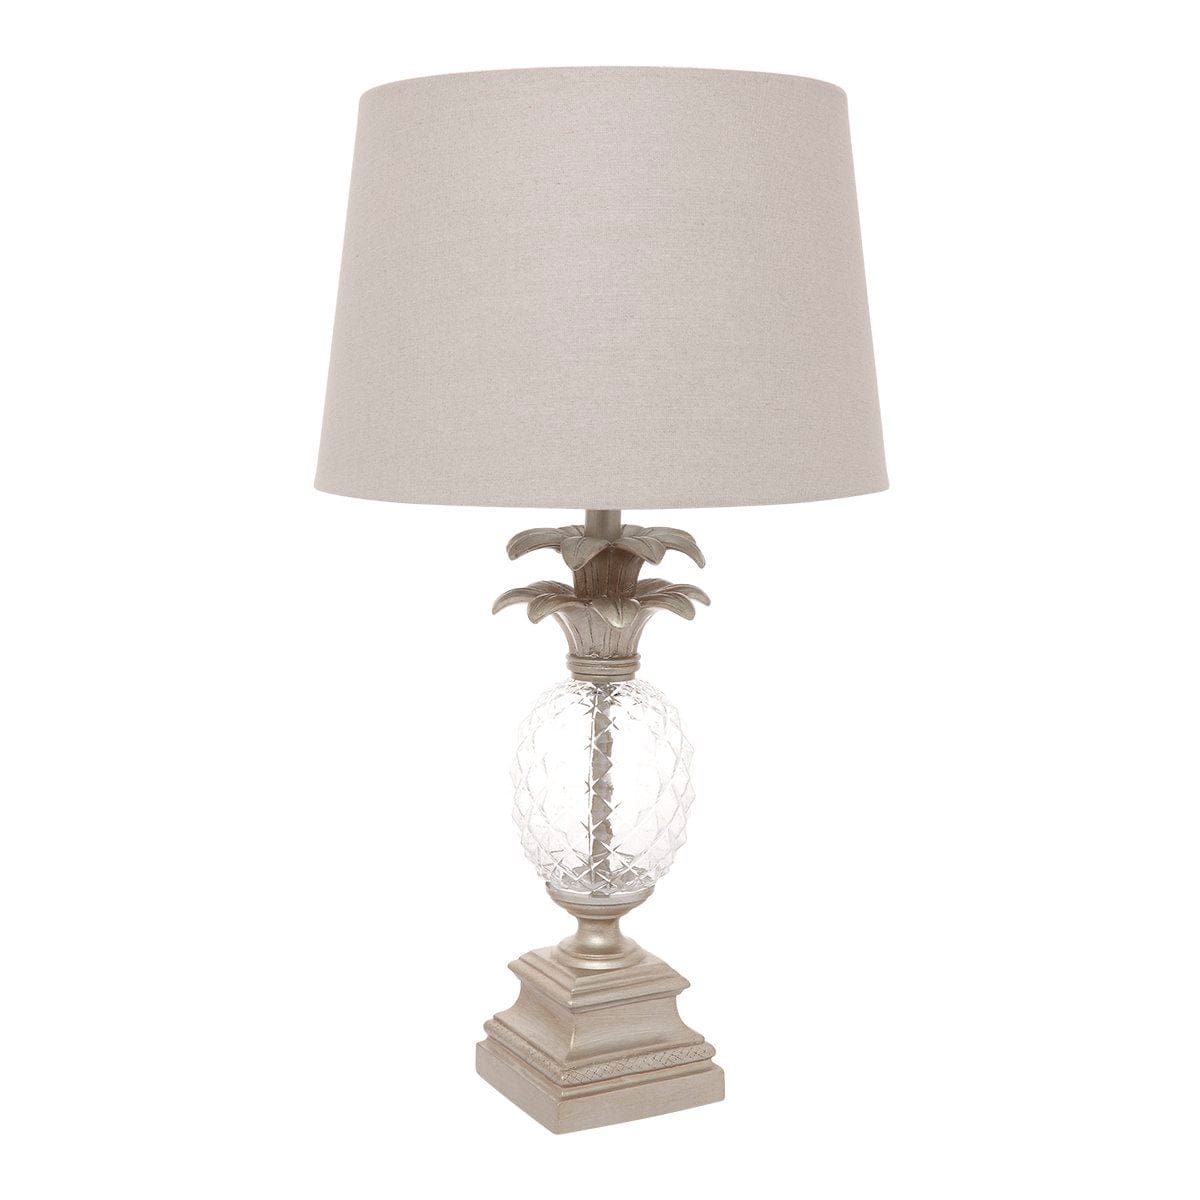 CAFE LIGHTING & LIVING Table Lamp Langley Table Lamp - Antique Silver 11628